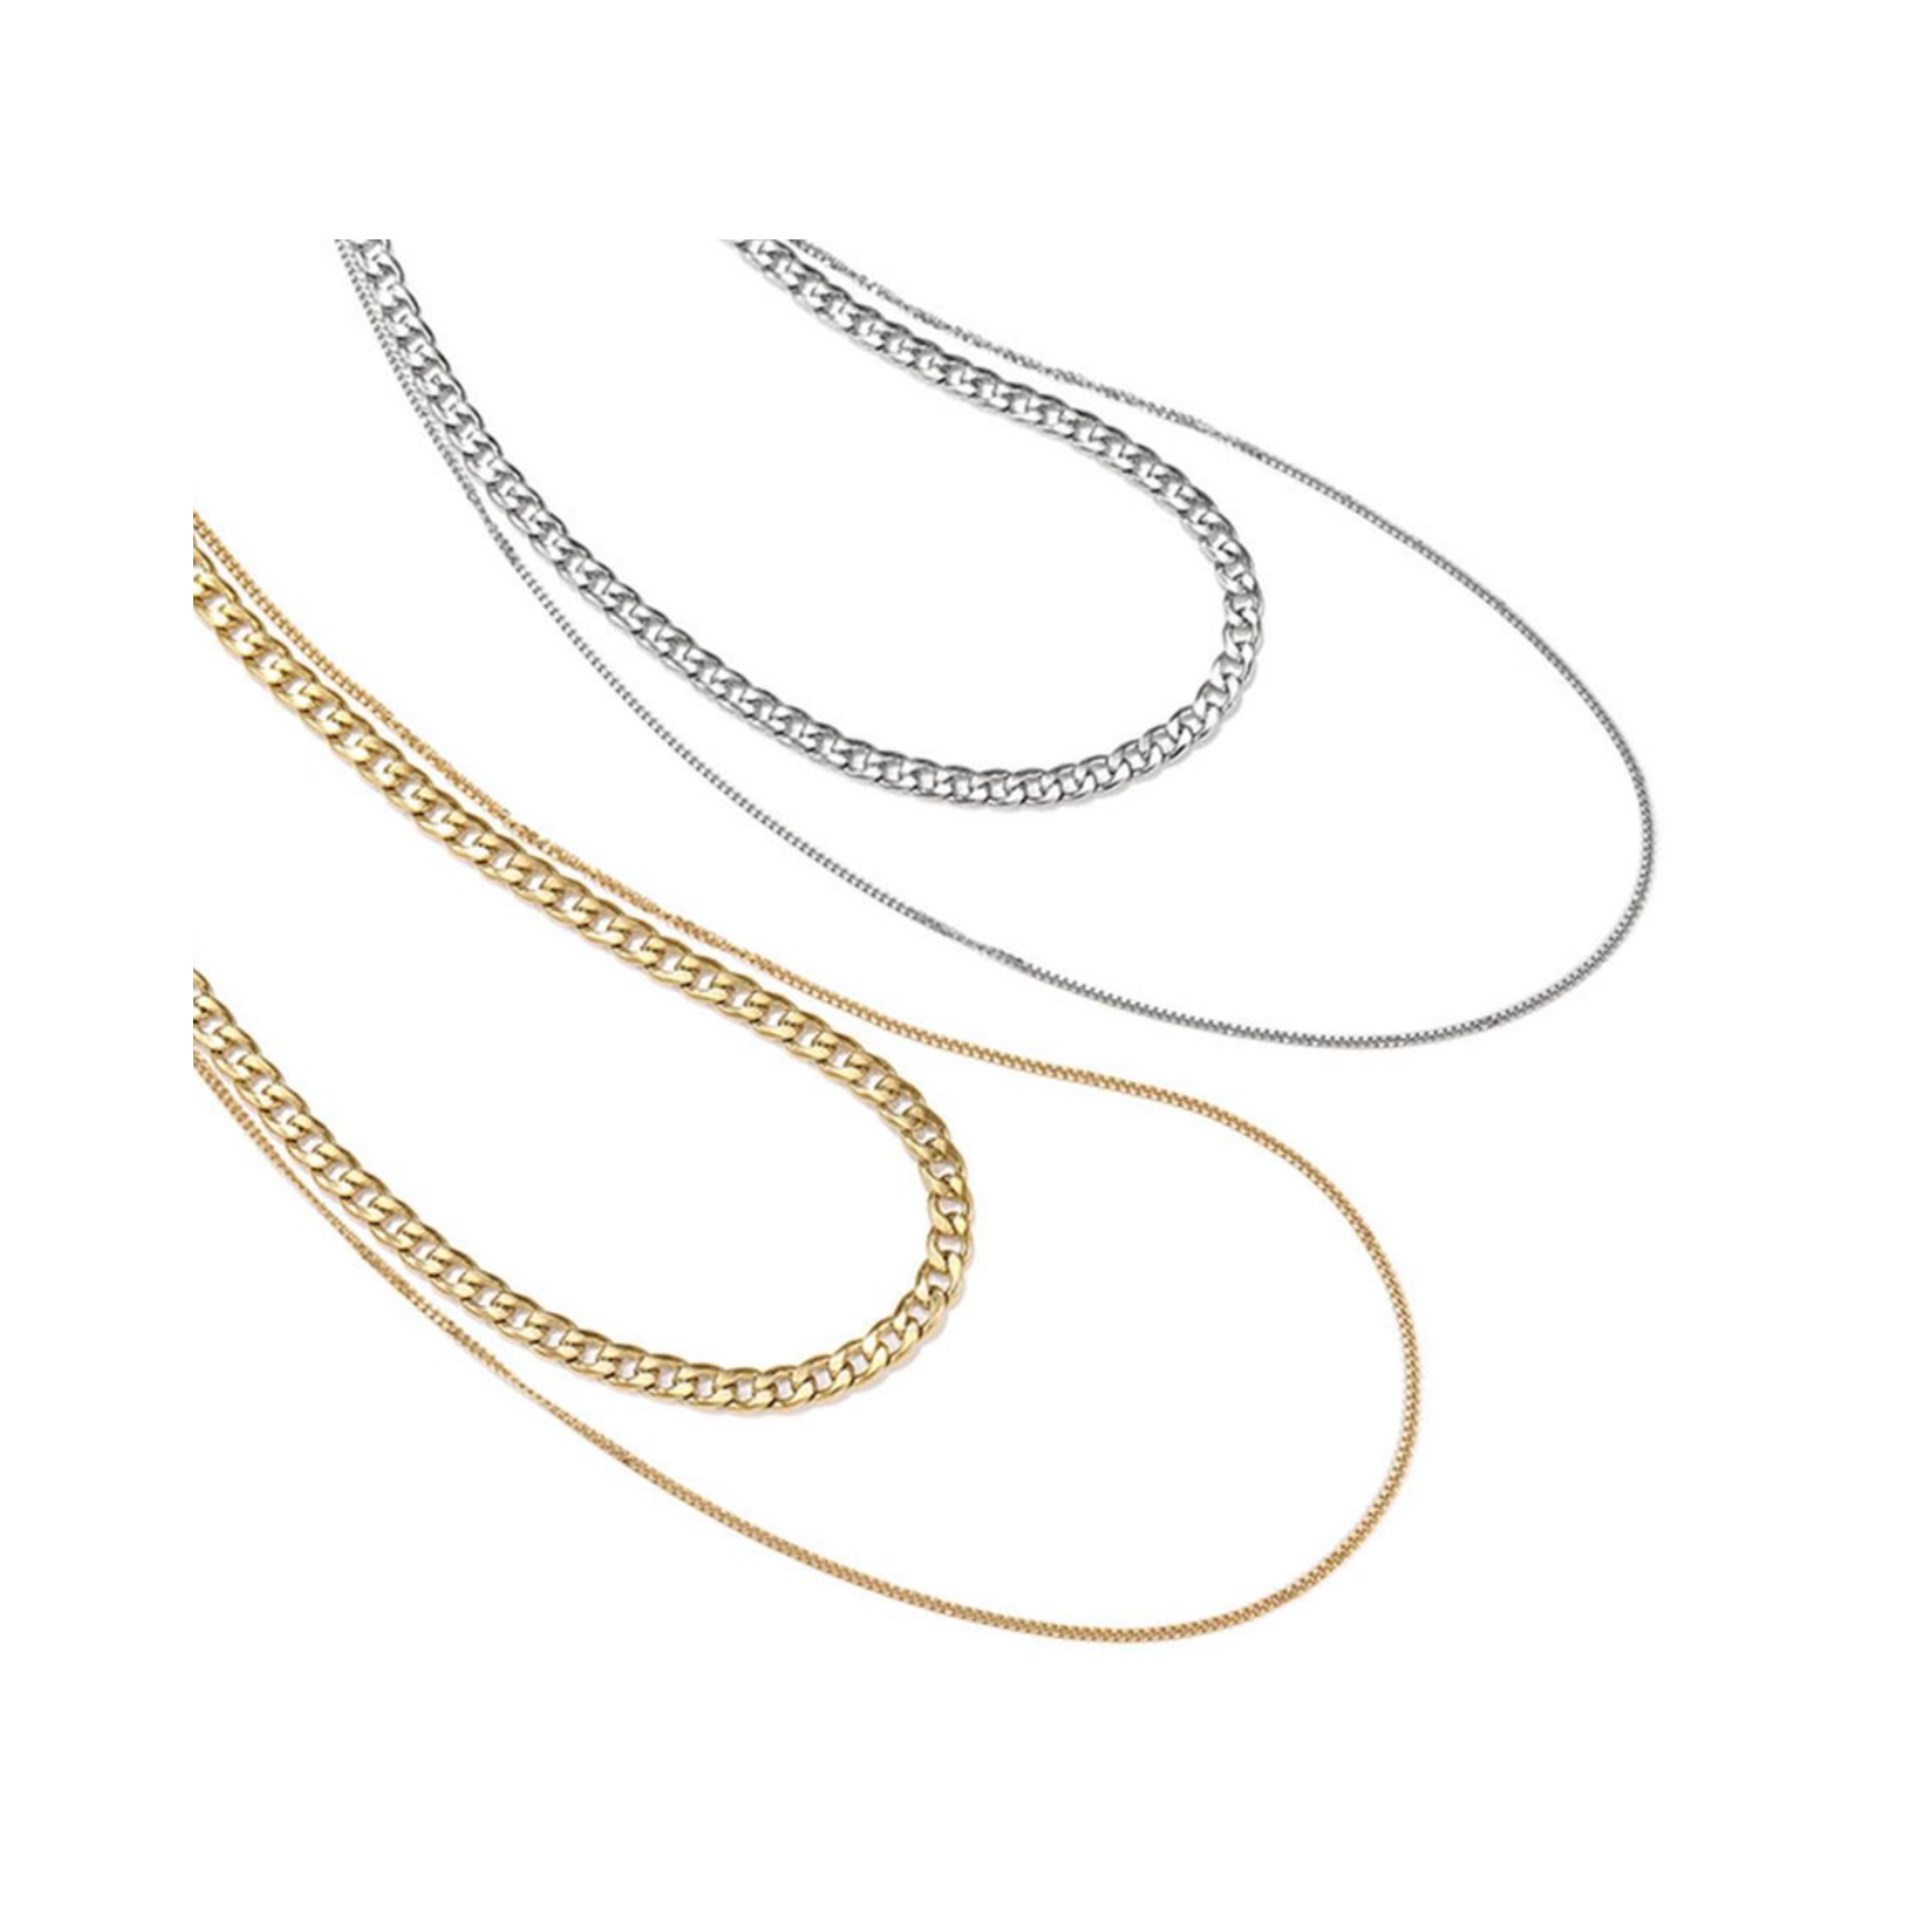 Blair Layered Chain Necklace | Sterling Silver & 14k Gold Plated